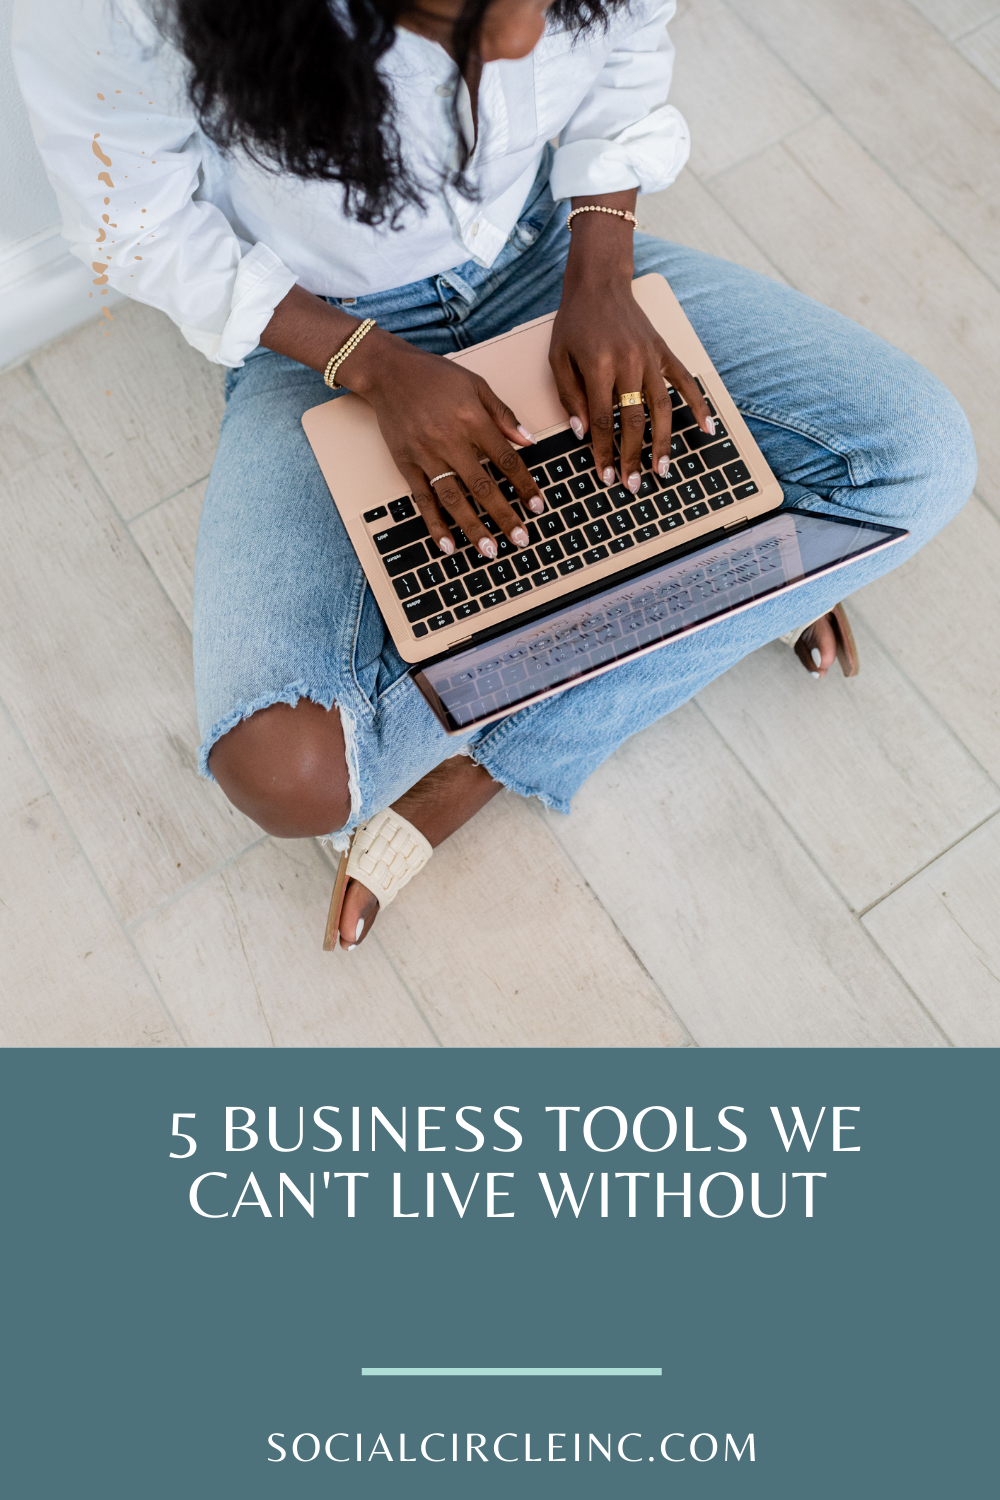 5 Business Tools We Can't Live Without (and the amazing founders behind them) 2